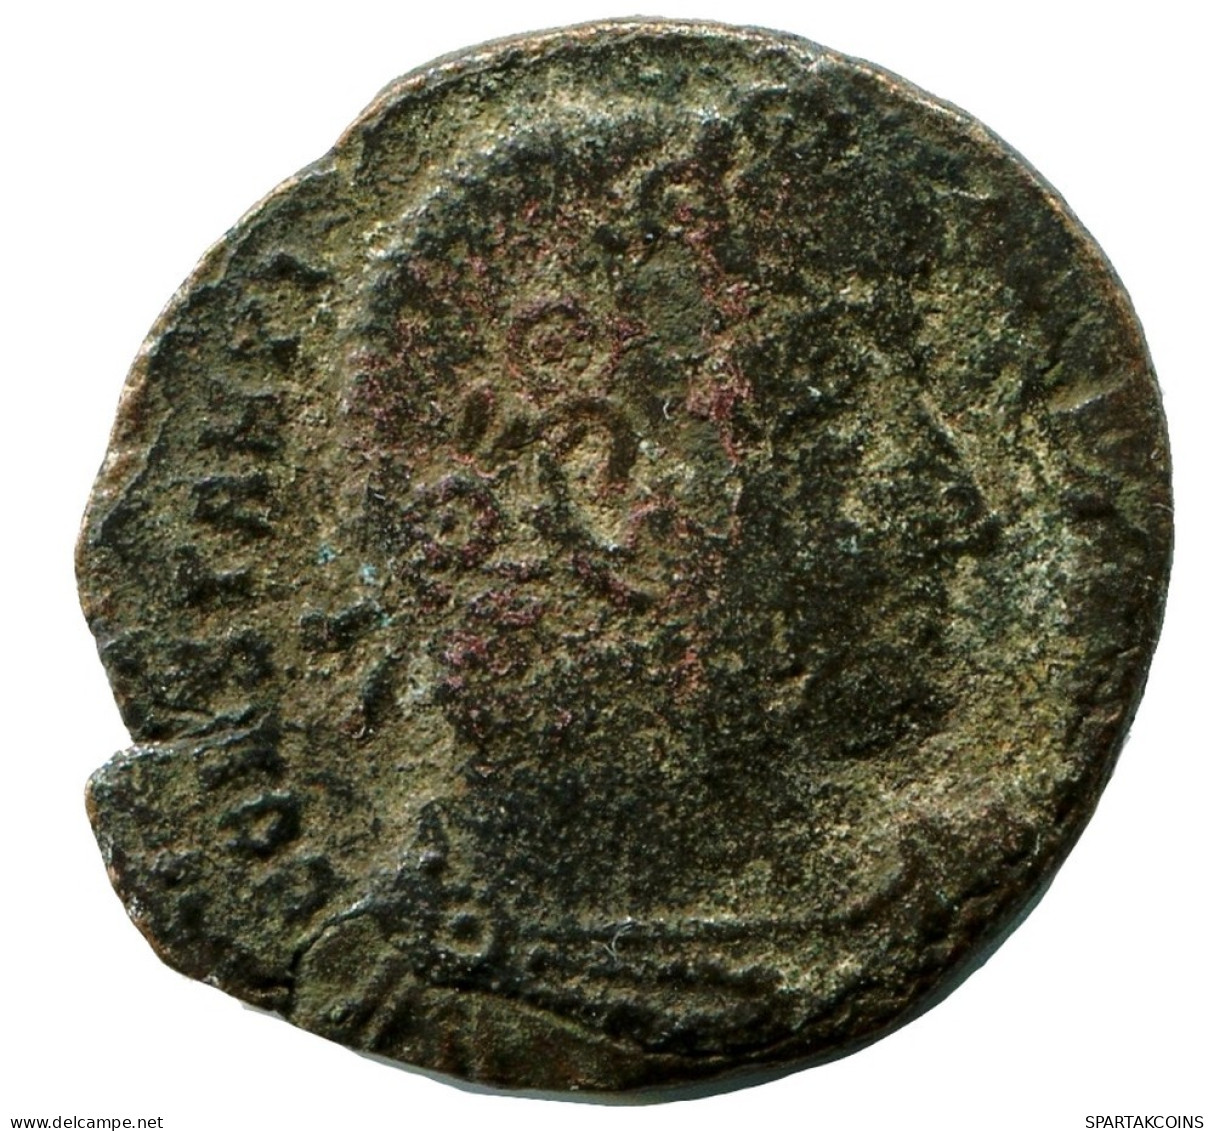 CONSTANTINE I MINTED IN ROME ITALY FROM THE ROYAL ONTARIO MUSEUM #ANC11169.14.F.A - El Impero Christiano (307 / 363)